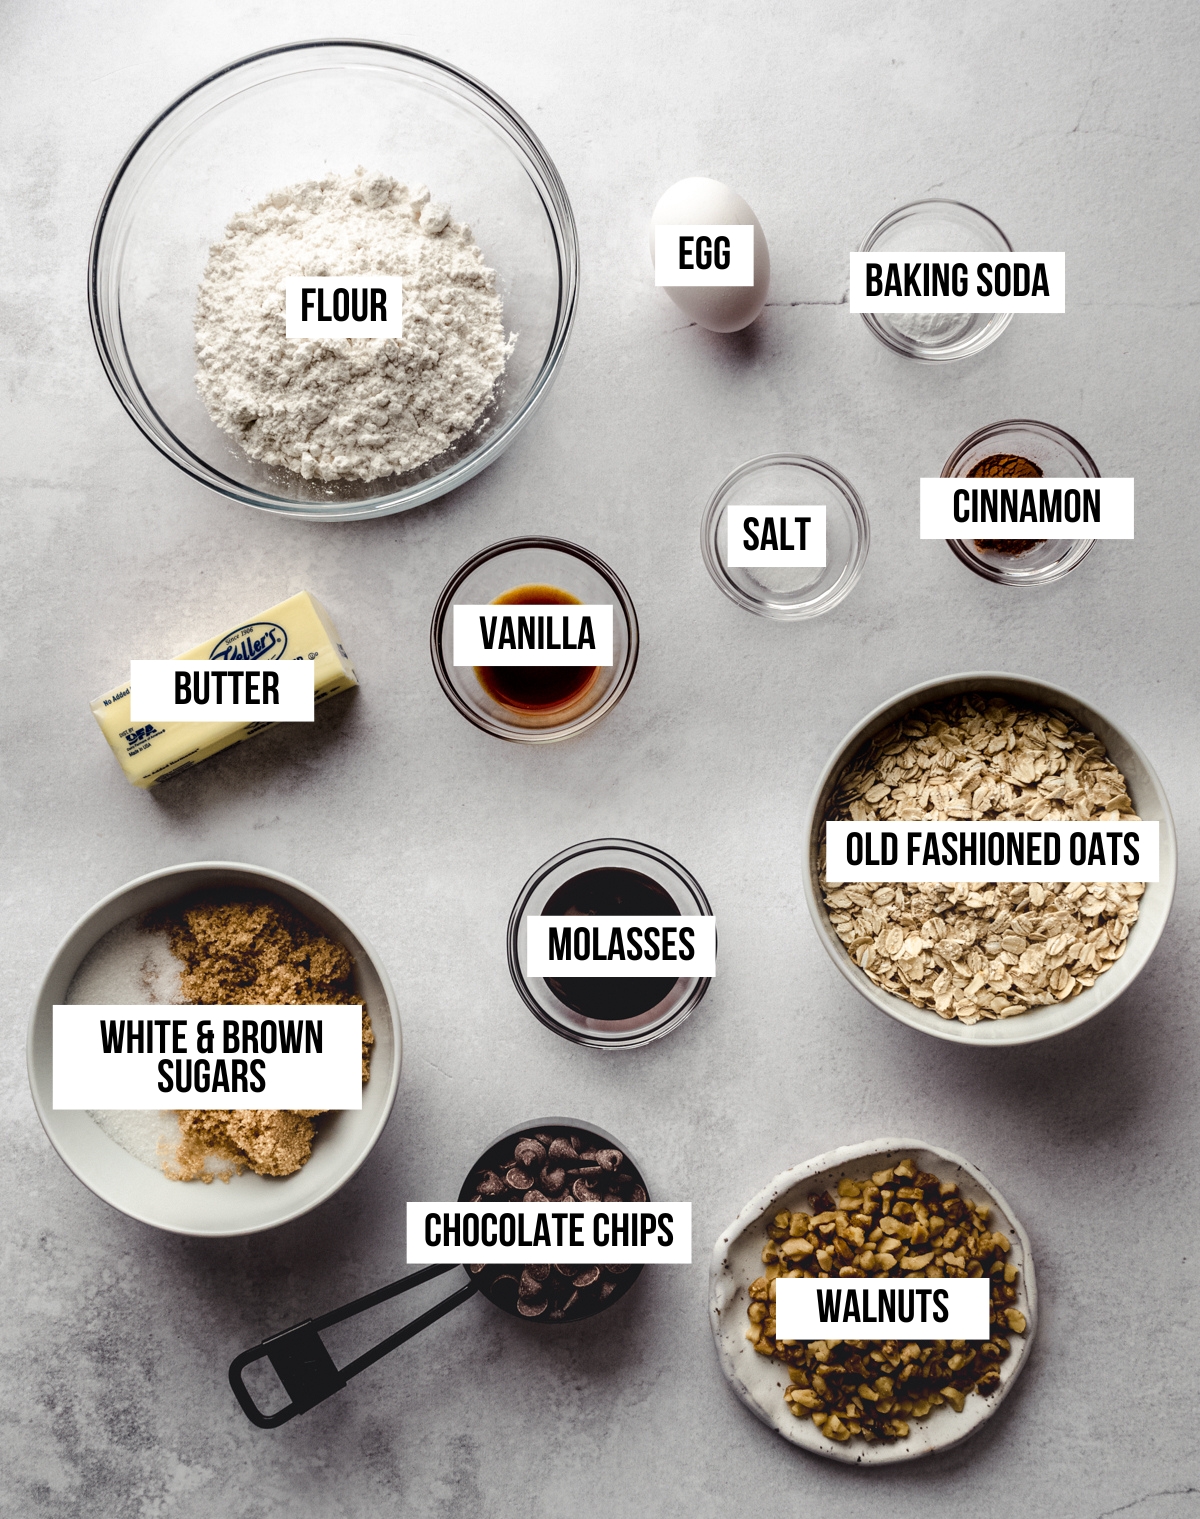 Aerial photo of ingredients to make oatmeal walnut chocolate chip cookies with text overlay labeling each ingredient.